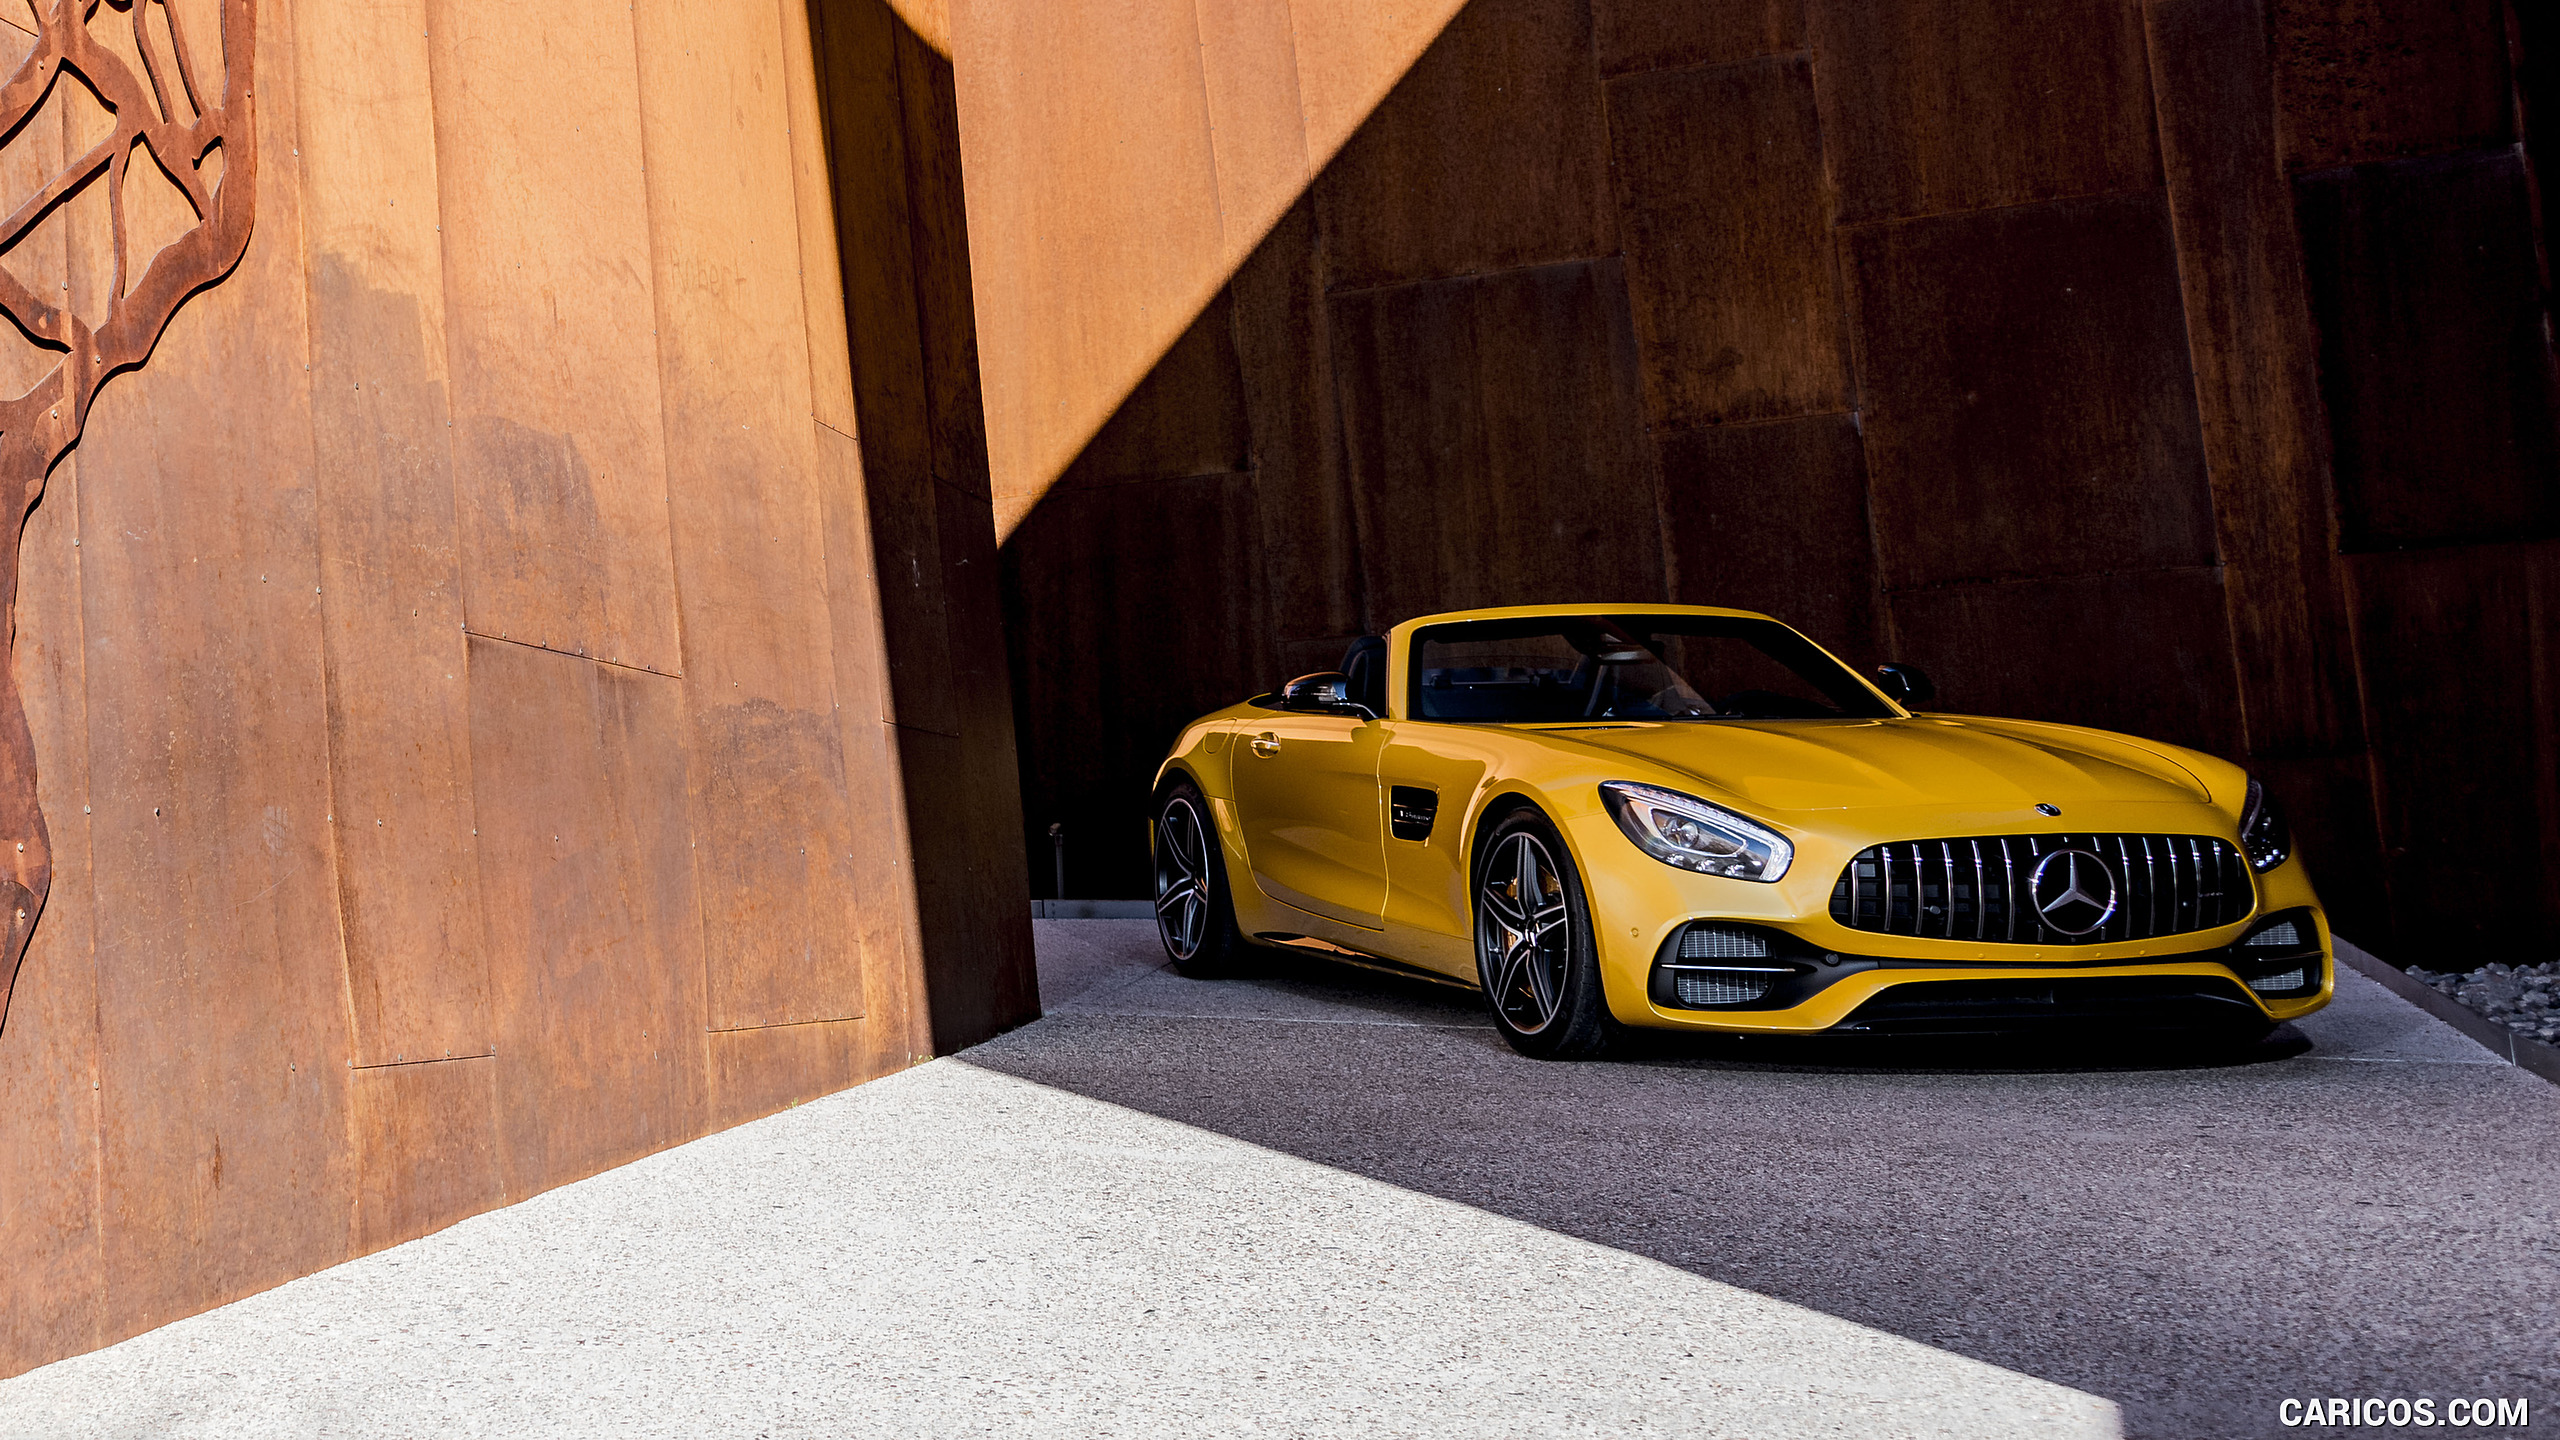 2018 Mercedes-AMG GT C Roadster - Front Three-Quarter, #249 of 350